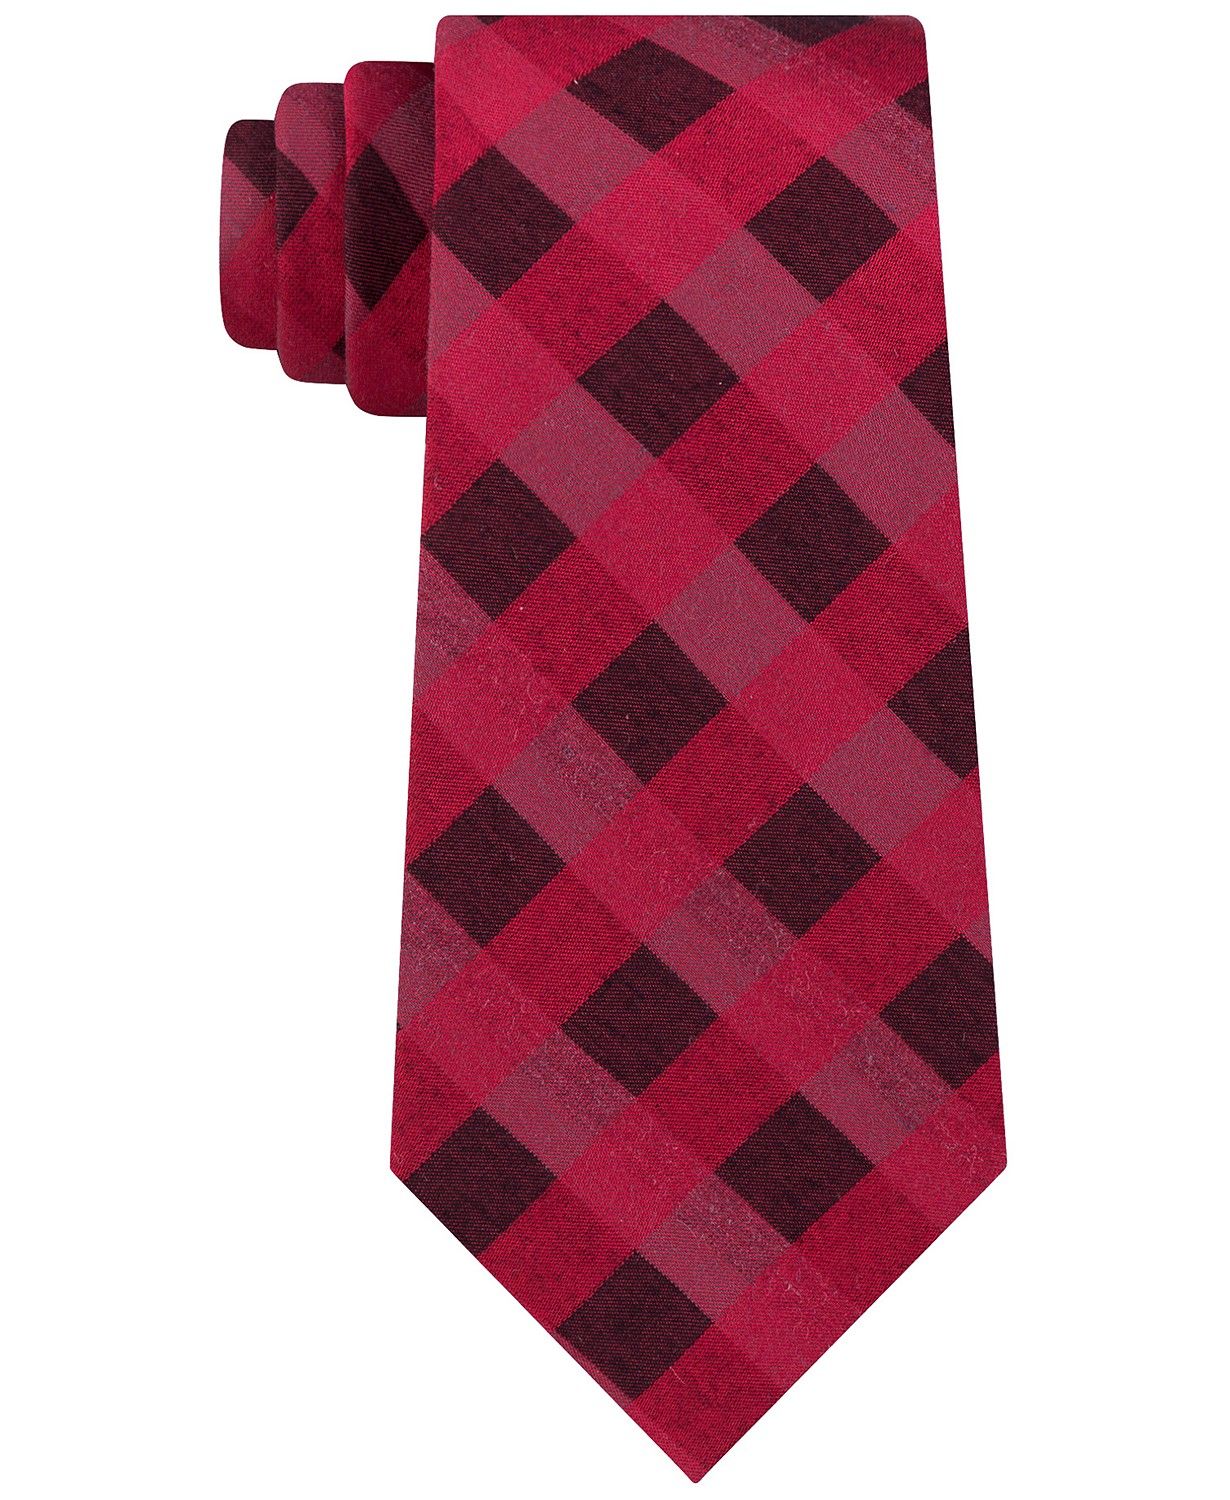 <br>Color: Reds<br>Pattern: Plaids & Checks<br>Style: Neck Tie<br>Width: Skinny (Material: Silk